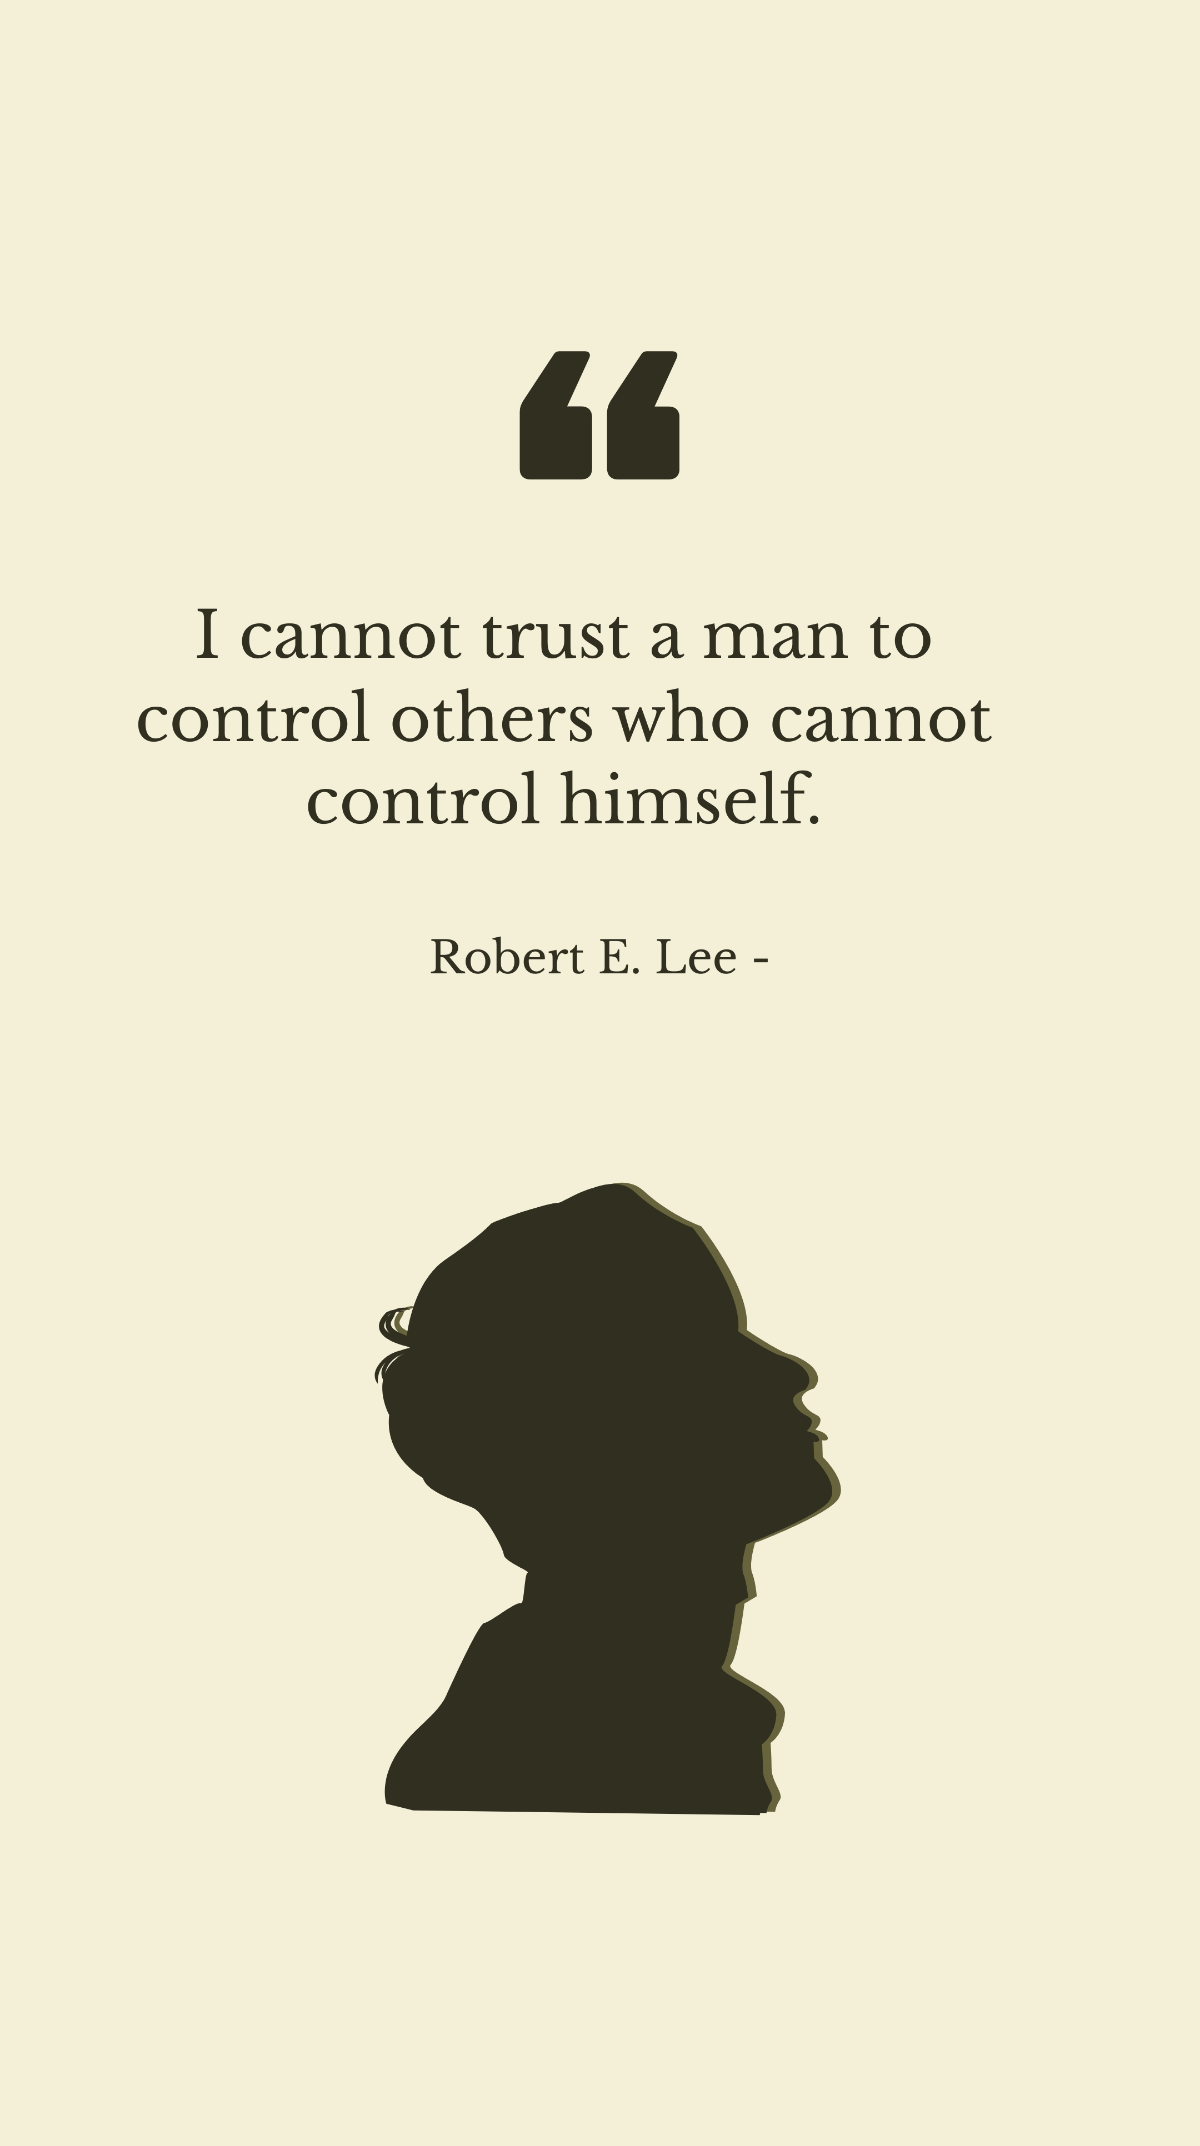 Robert E. Lee - I cannot trust a man to control others who cannot control himself. Template